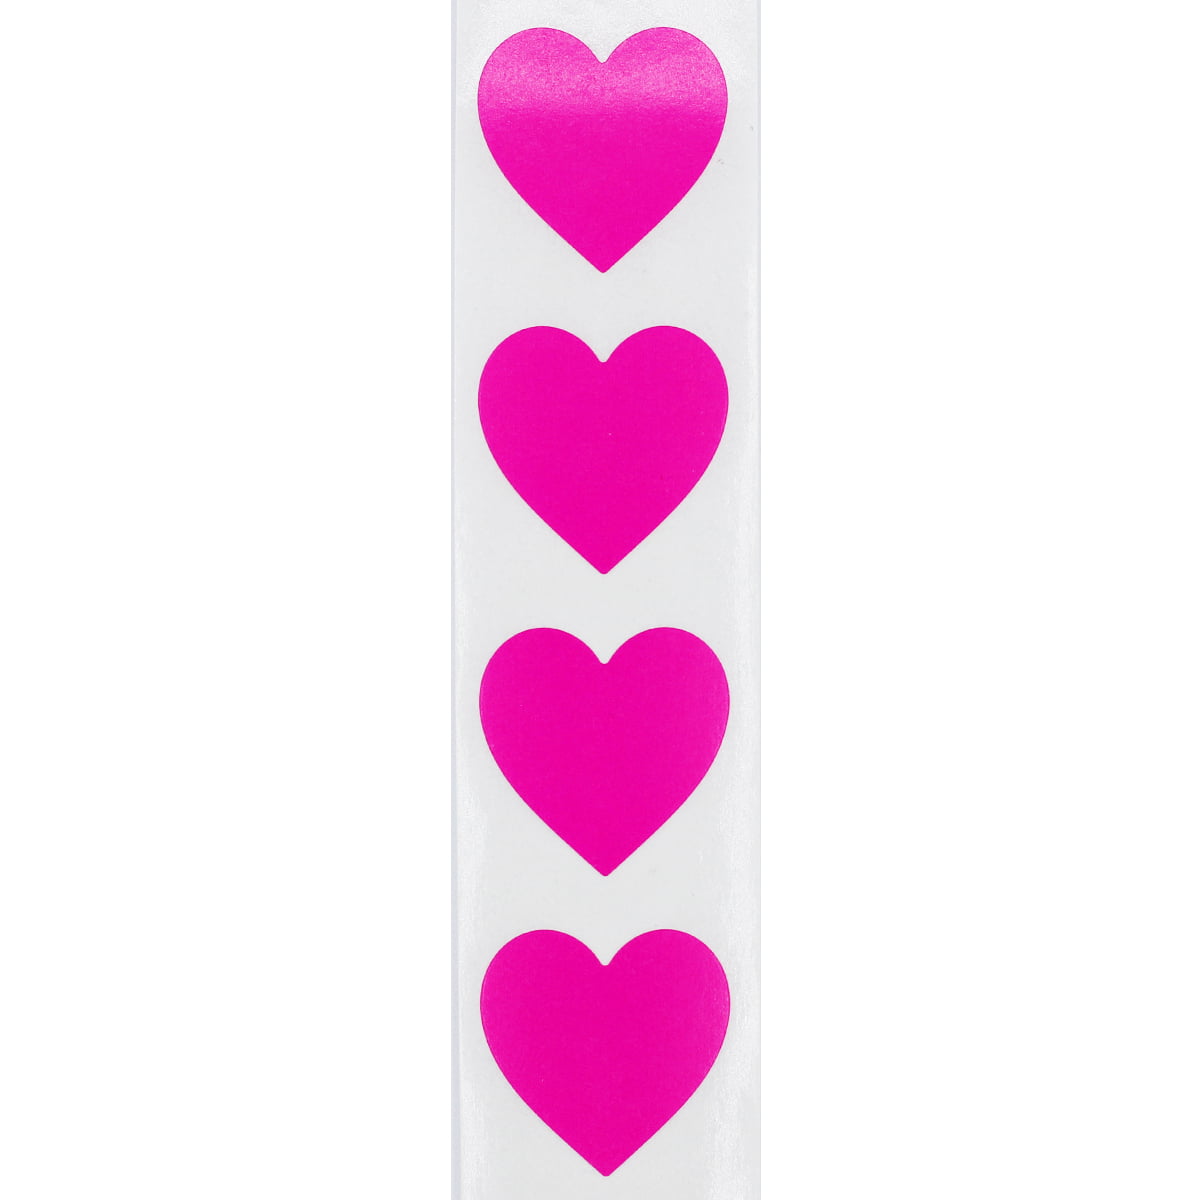 Hot Pink Heart Stickers For Valentine's Day Crafting Scrapbooking 1 Inch  500 Adhesive Stickers 